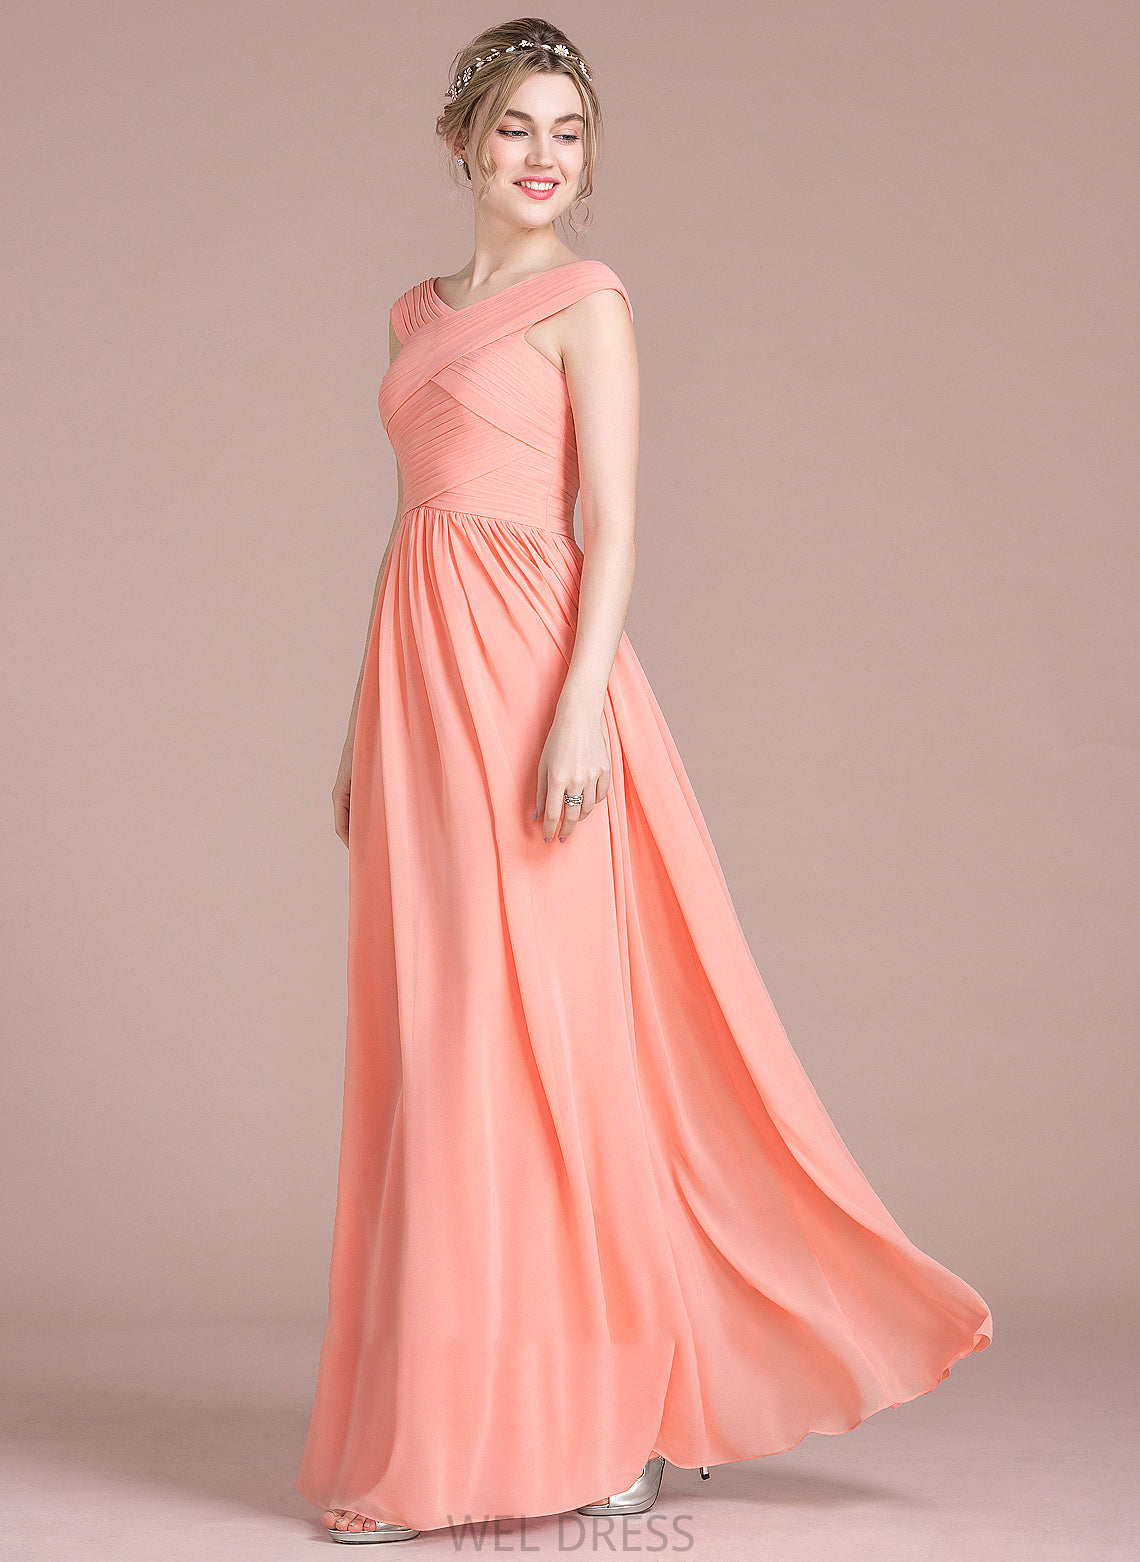 V-neck Ball-Gown/Princess Ruffle Floor-Length Chiffon With Hailey Prom Dresses